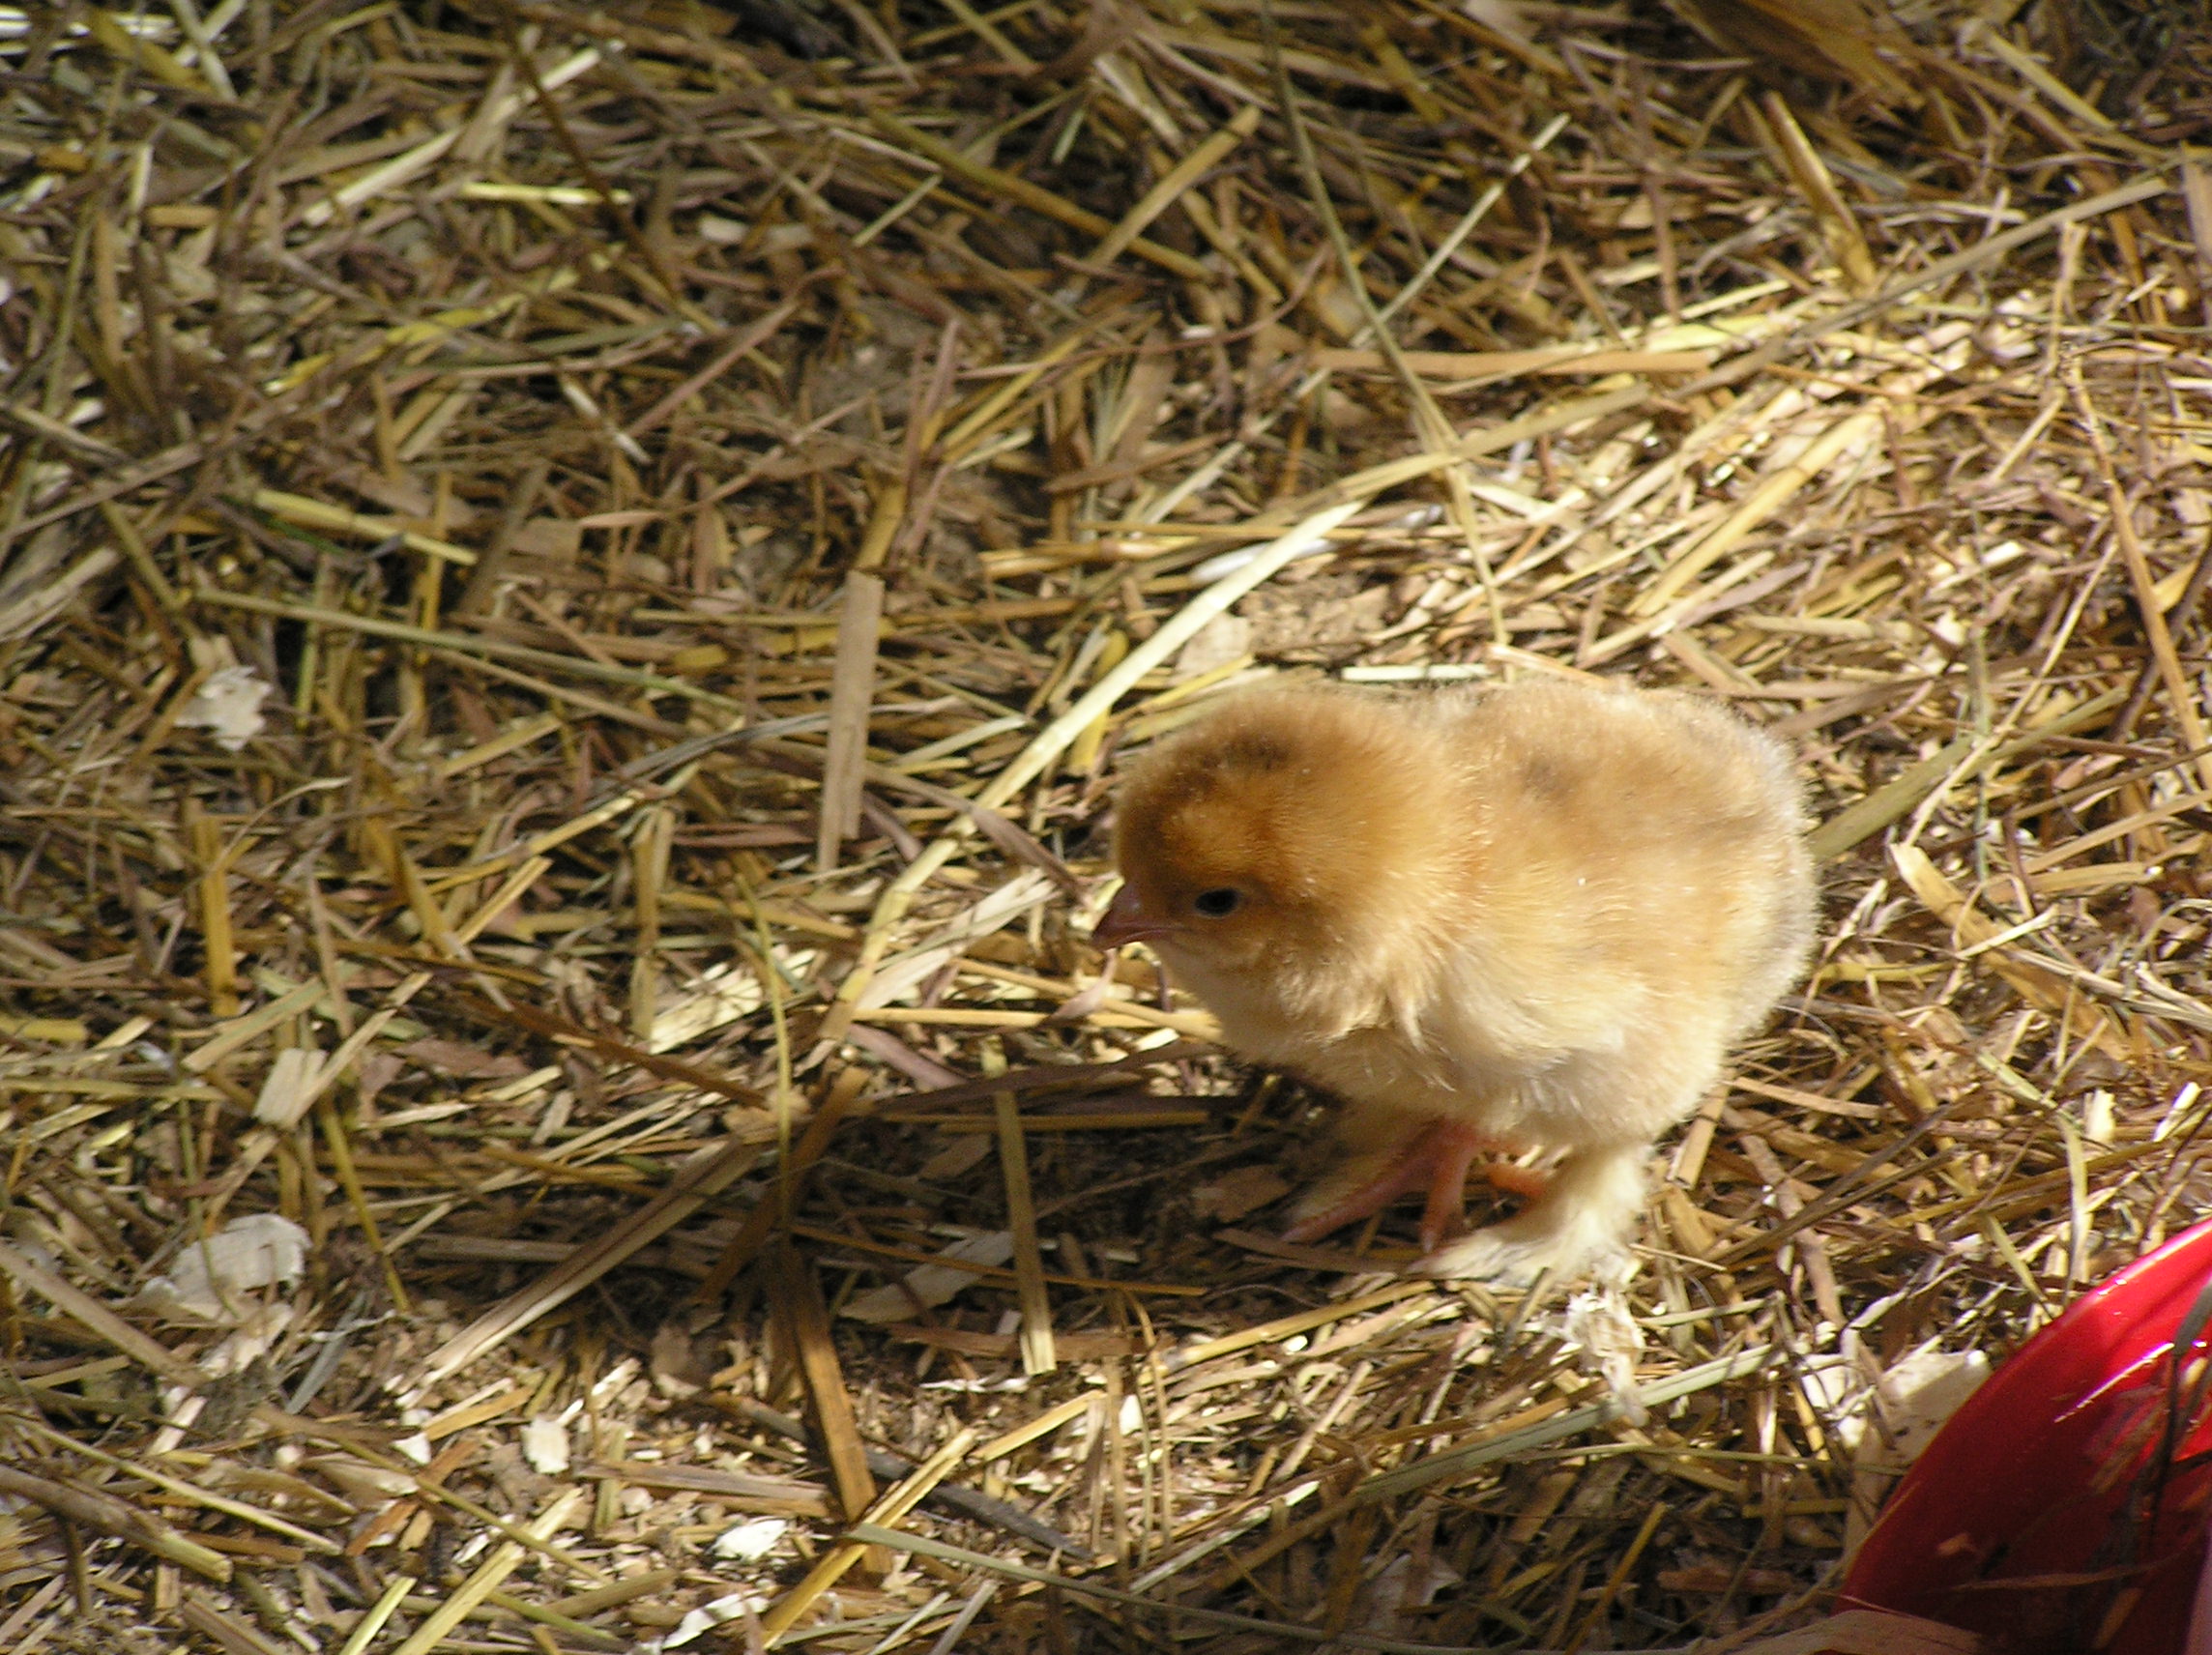 chicks hatched by turkey sunday the 22 of april 2012, Biggie Smalls is the dad